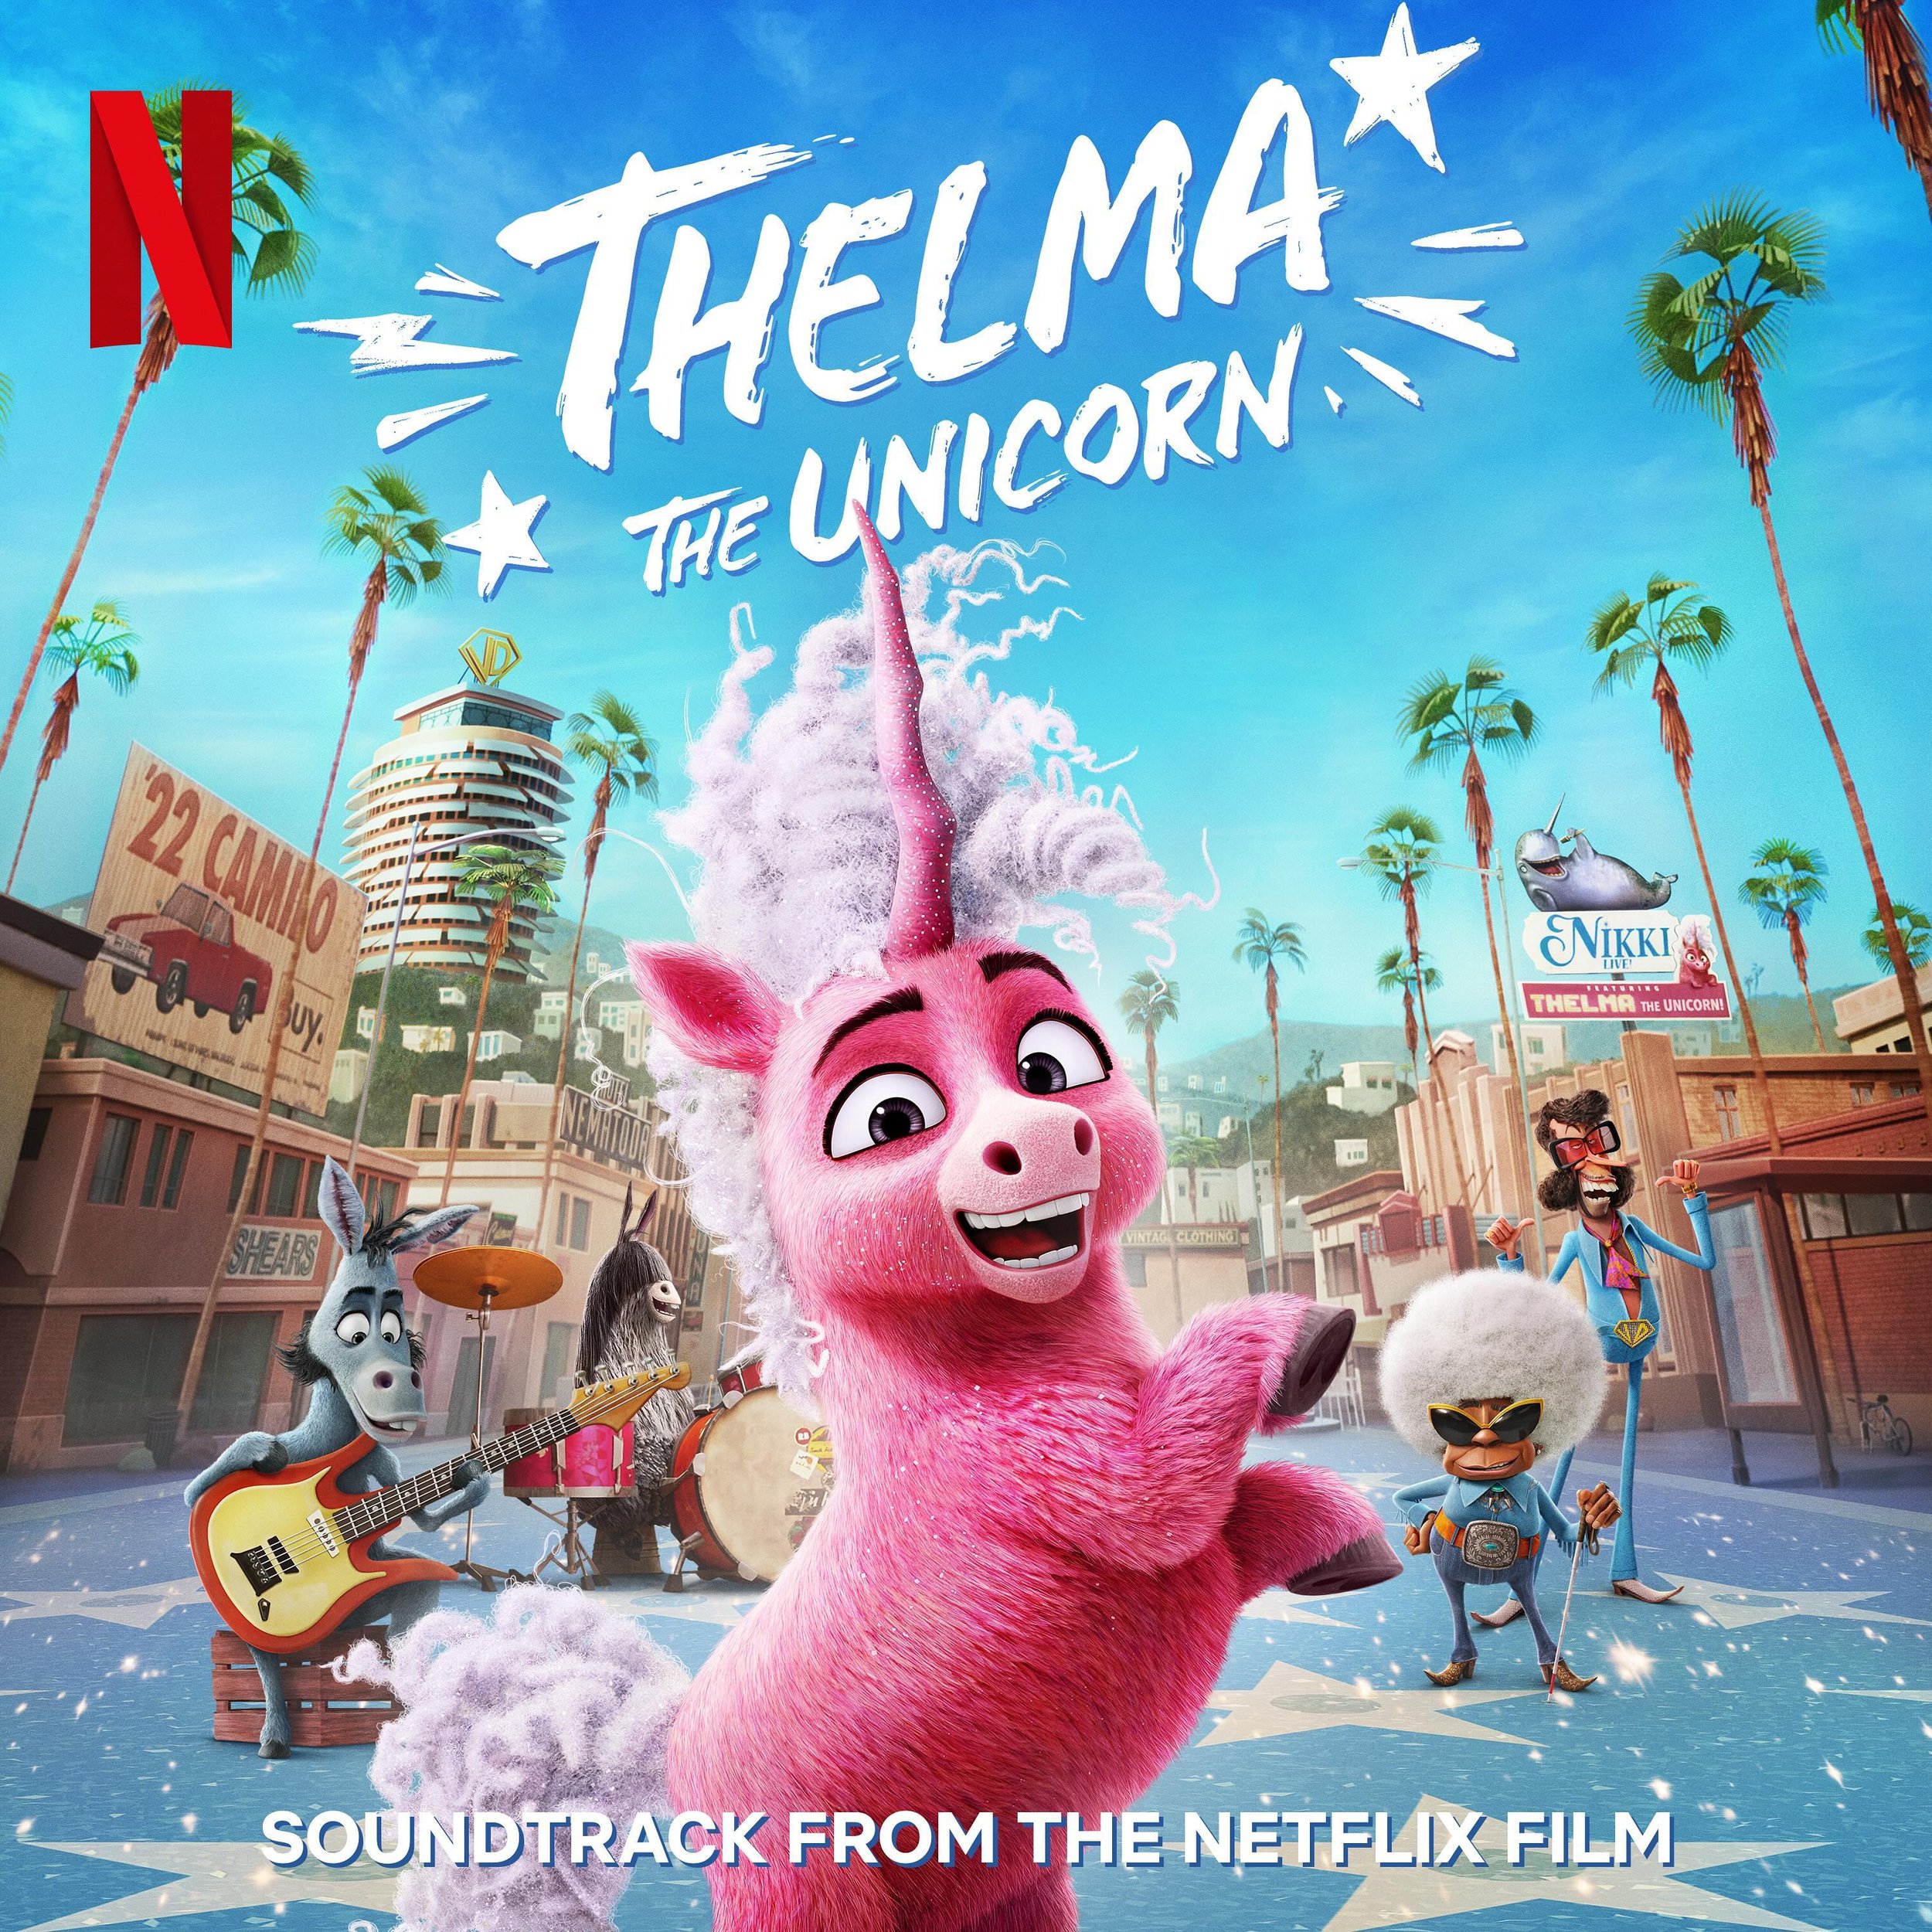 @blackfootwhitefoot - Fire Inside (From the @netflix Film &ldquo;Thelma the Unicorn&rdquo;) out everywhere! Produced by @mikeelizondojr 🔥

#newmusicfriday 
#noexpectationsmusic